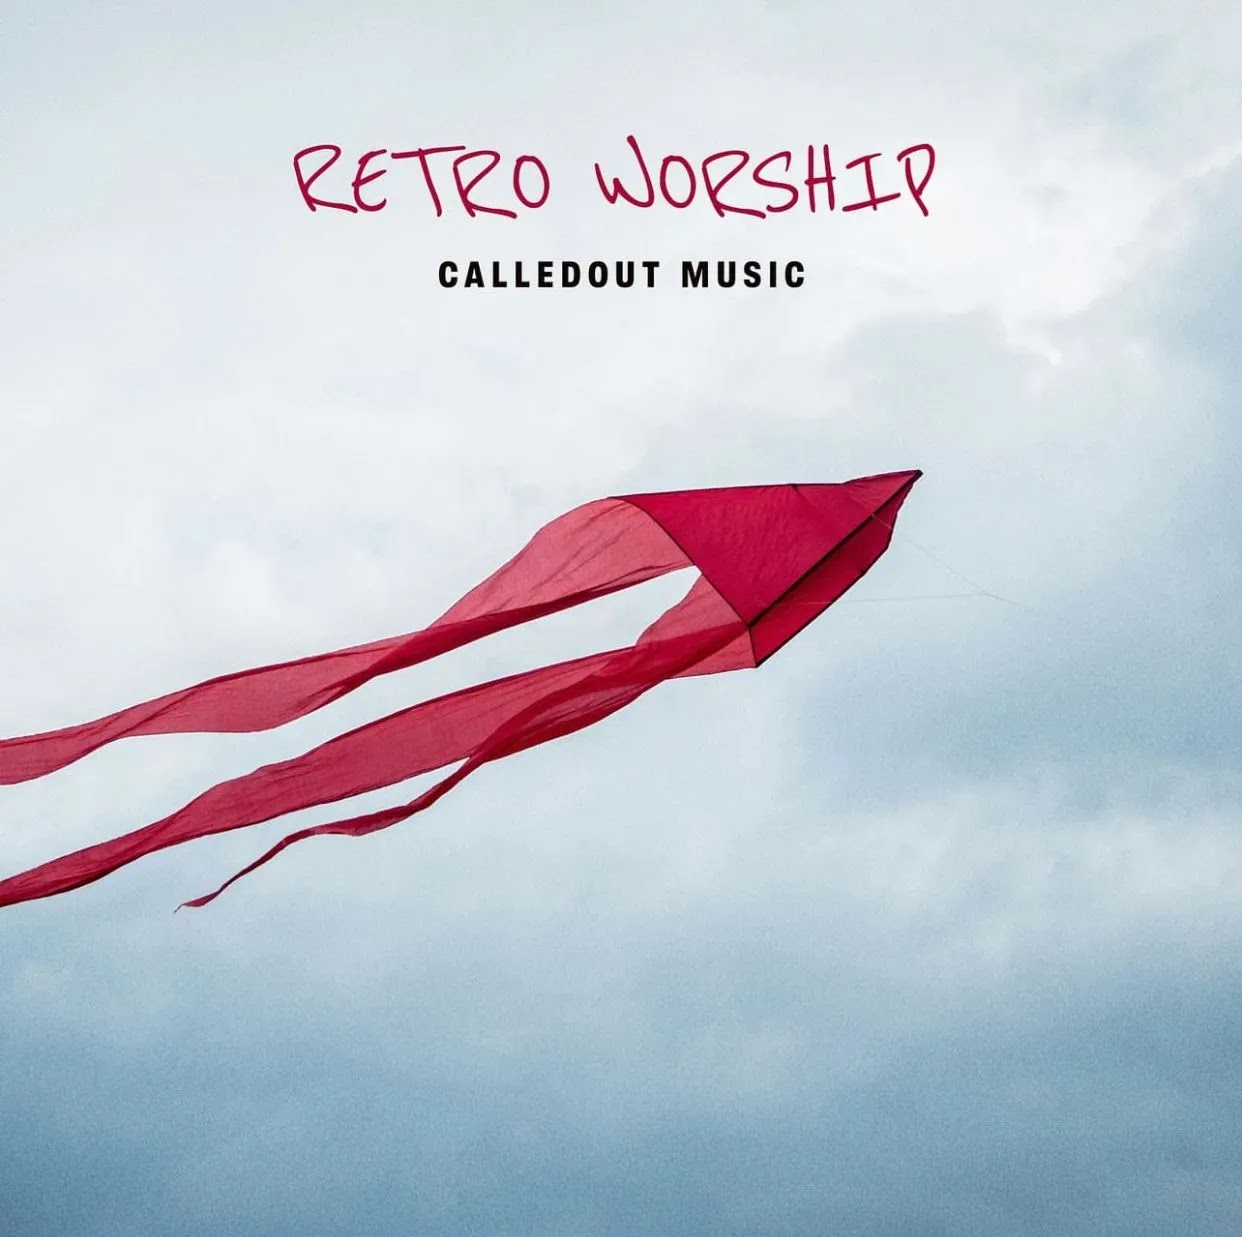 CalledOut Music to Release Highly Anticipated EP of Classic Remakes, “Retro Worship” [Video]